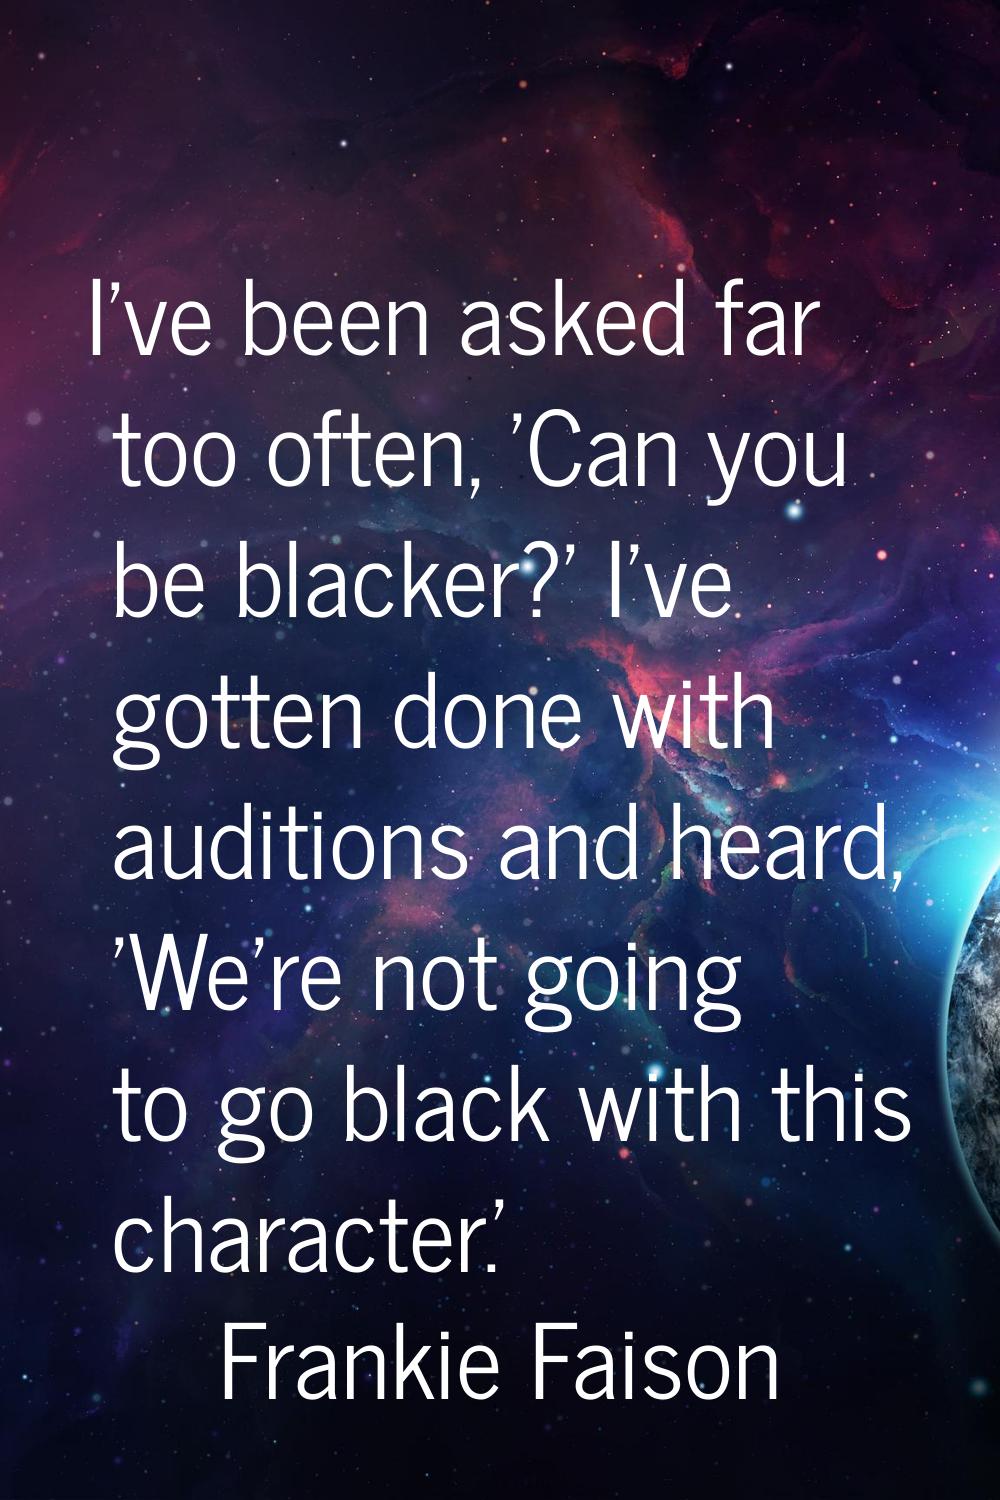 I've been asked far too often, 'Can you be blacker?' I've gotten done with auditions and heard, 'We